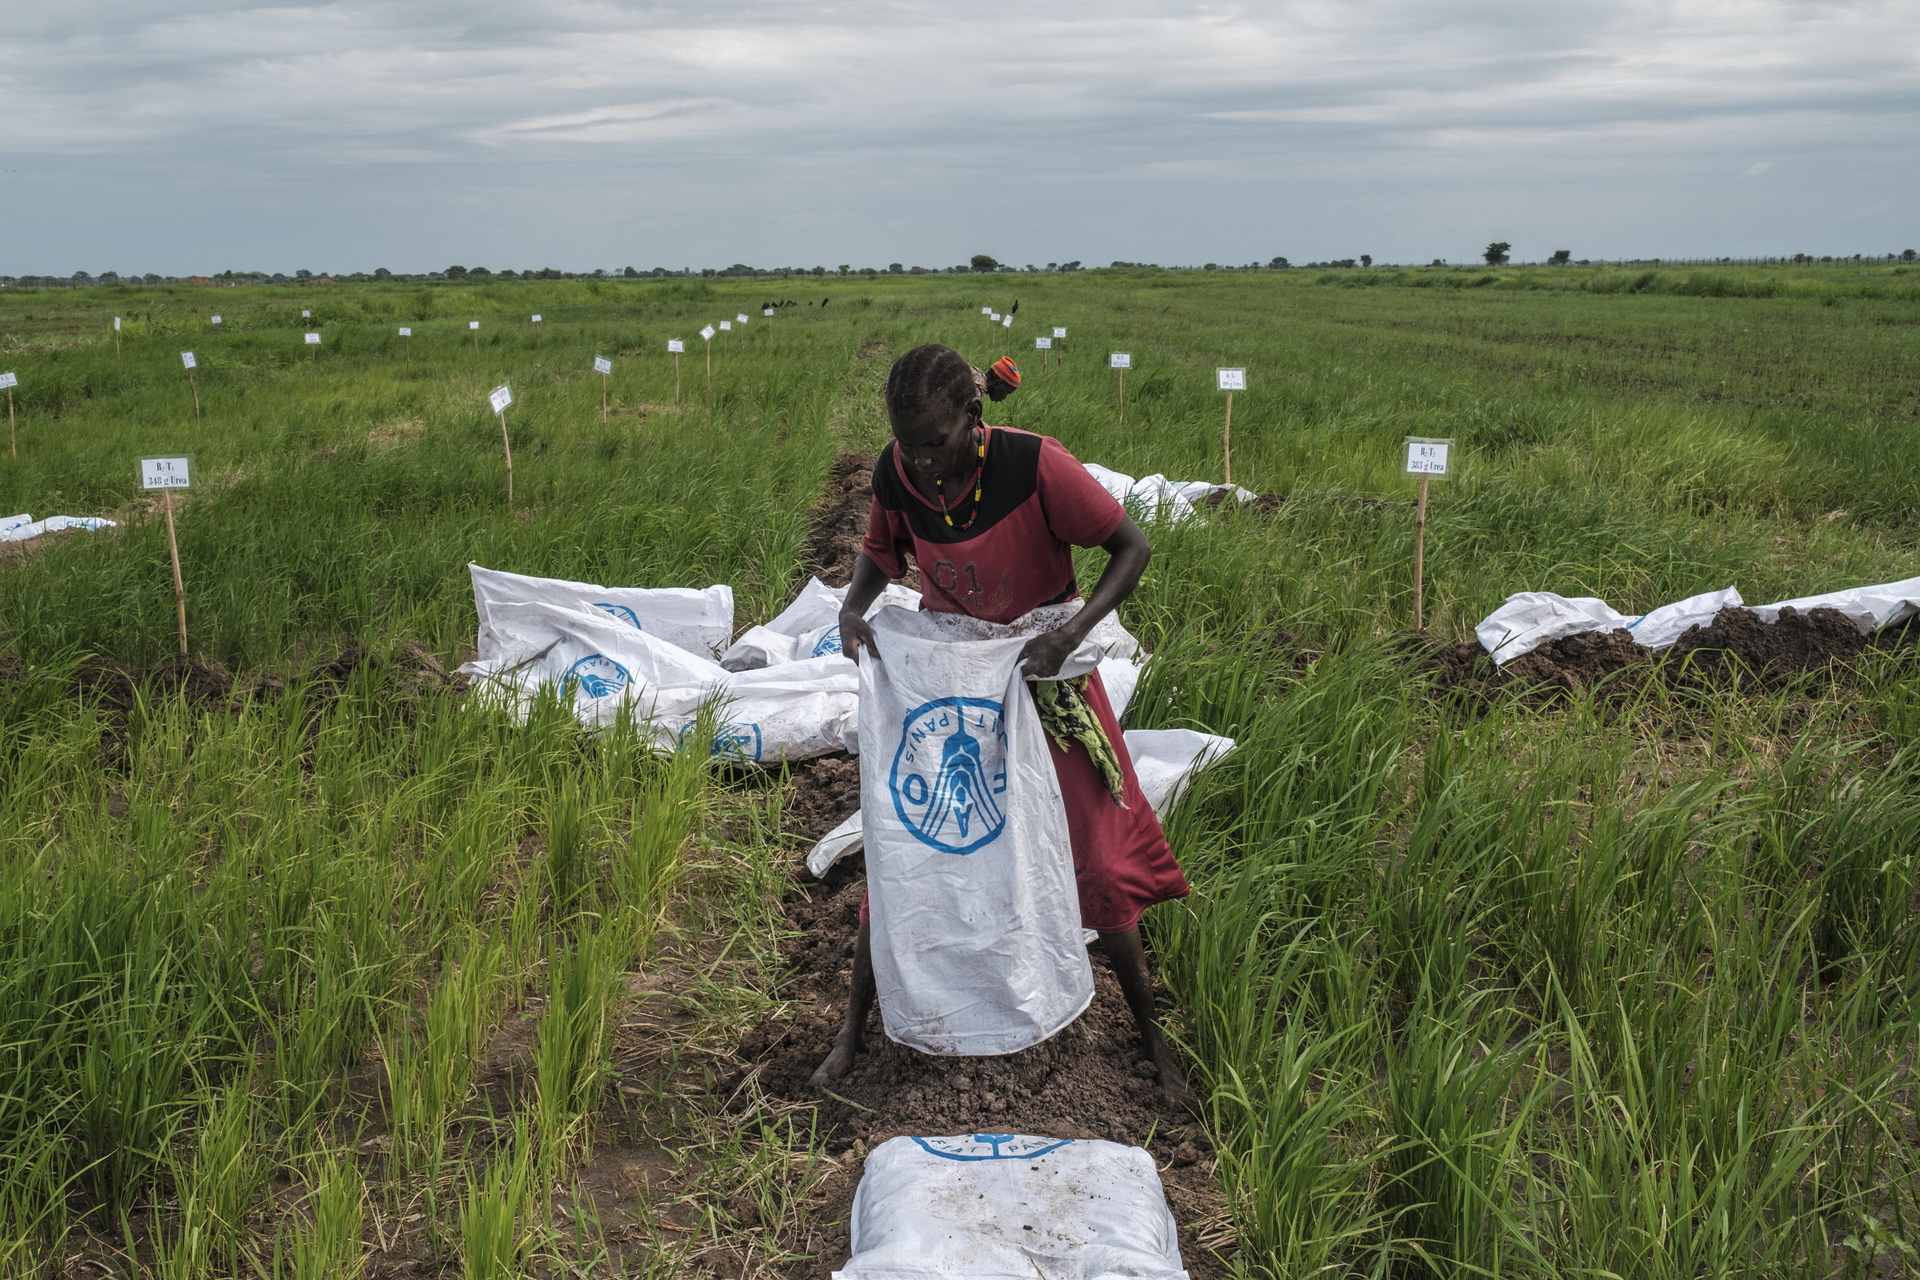 A farmer empties a sack with soil in order to build dykes at the site of the Aweil Rice Scheme, South Sudan.